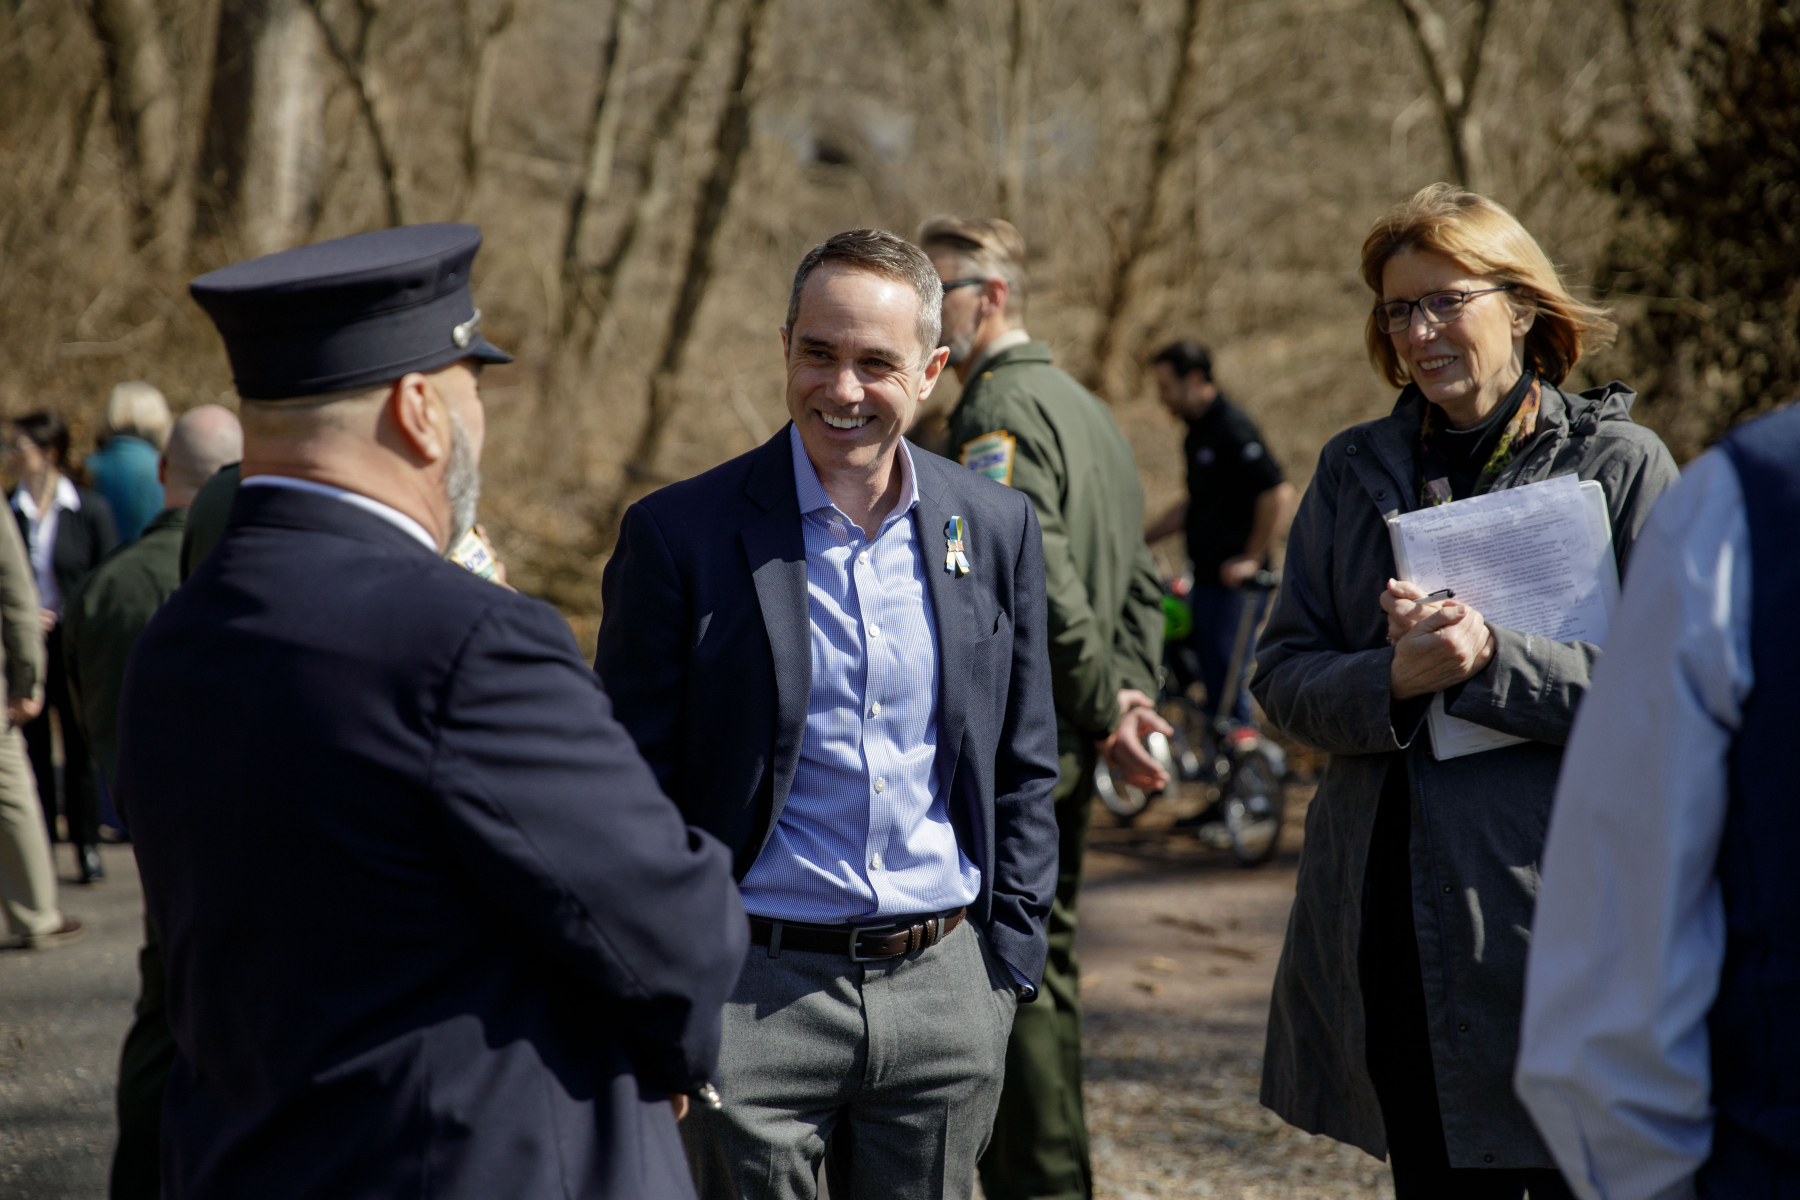 March 11, 2022: 9/11 Memorial Trail State Greenway Dedication with DCNR Secretary Dunn